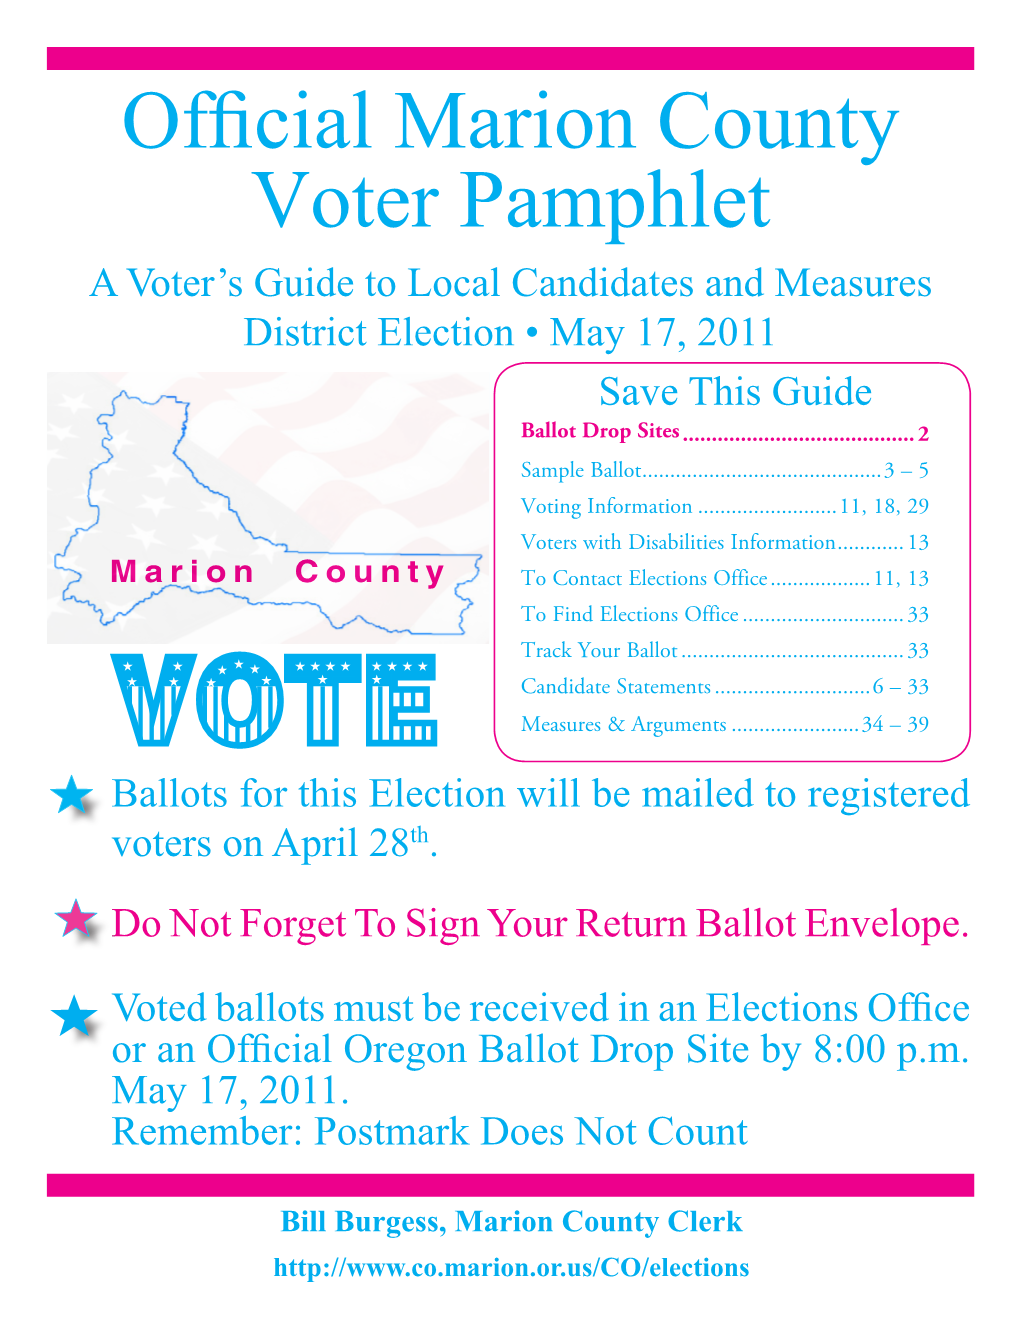 Official Marion County Voter Pamphlet a Voter’S Guide to Local Candidates and Measures District Election • May 17, 2011 Save This Guide Ballot Drop Sites